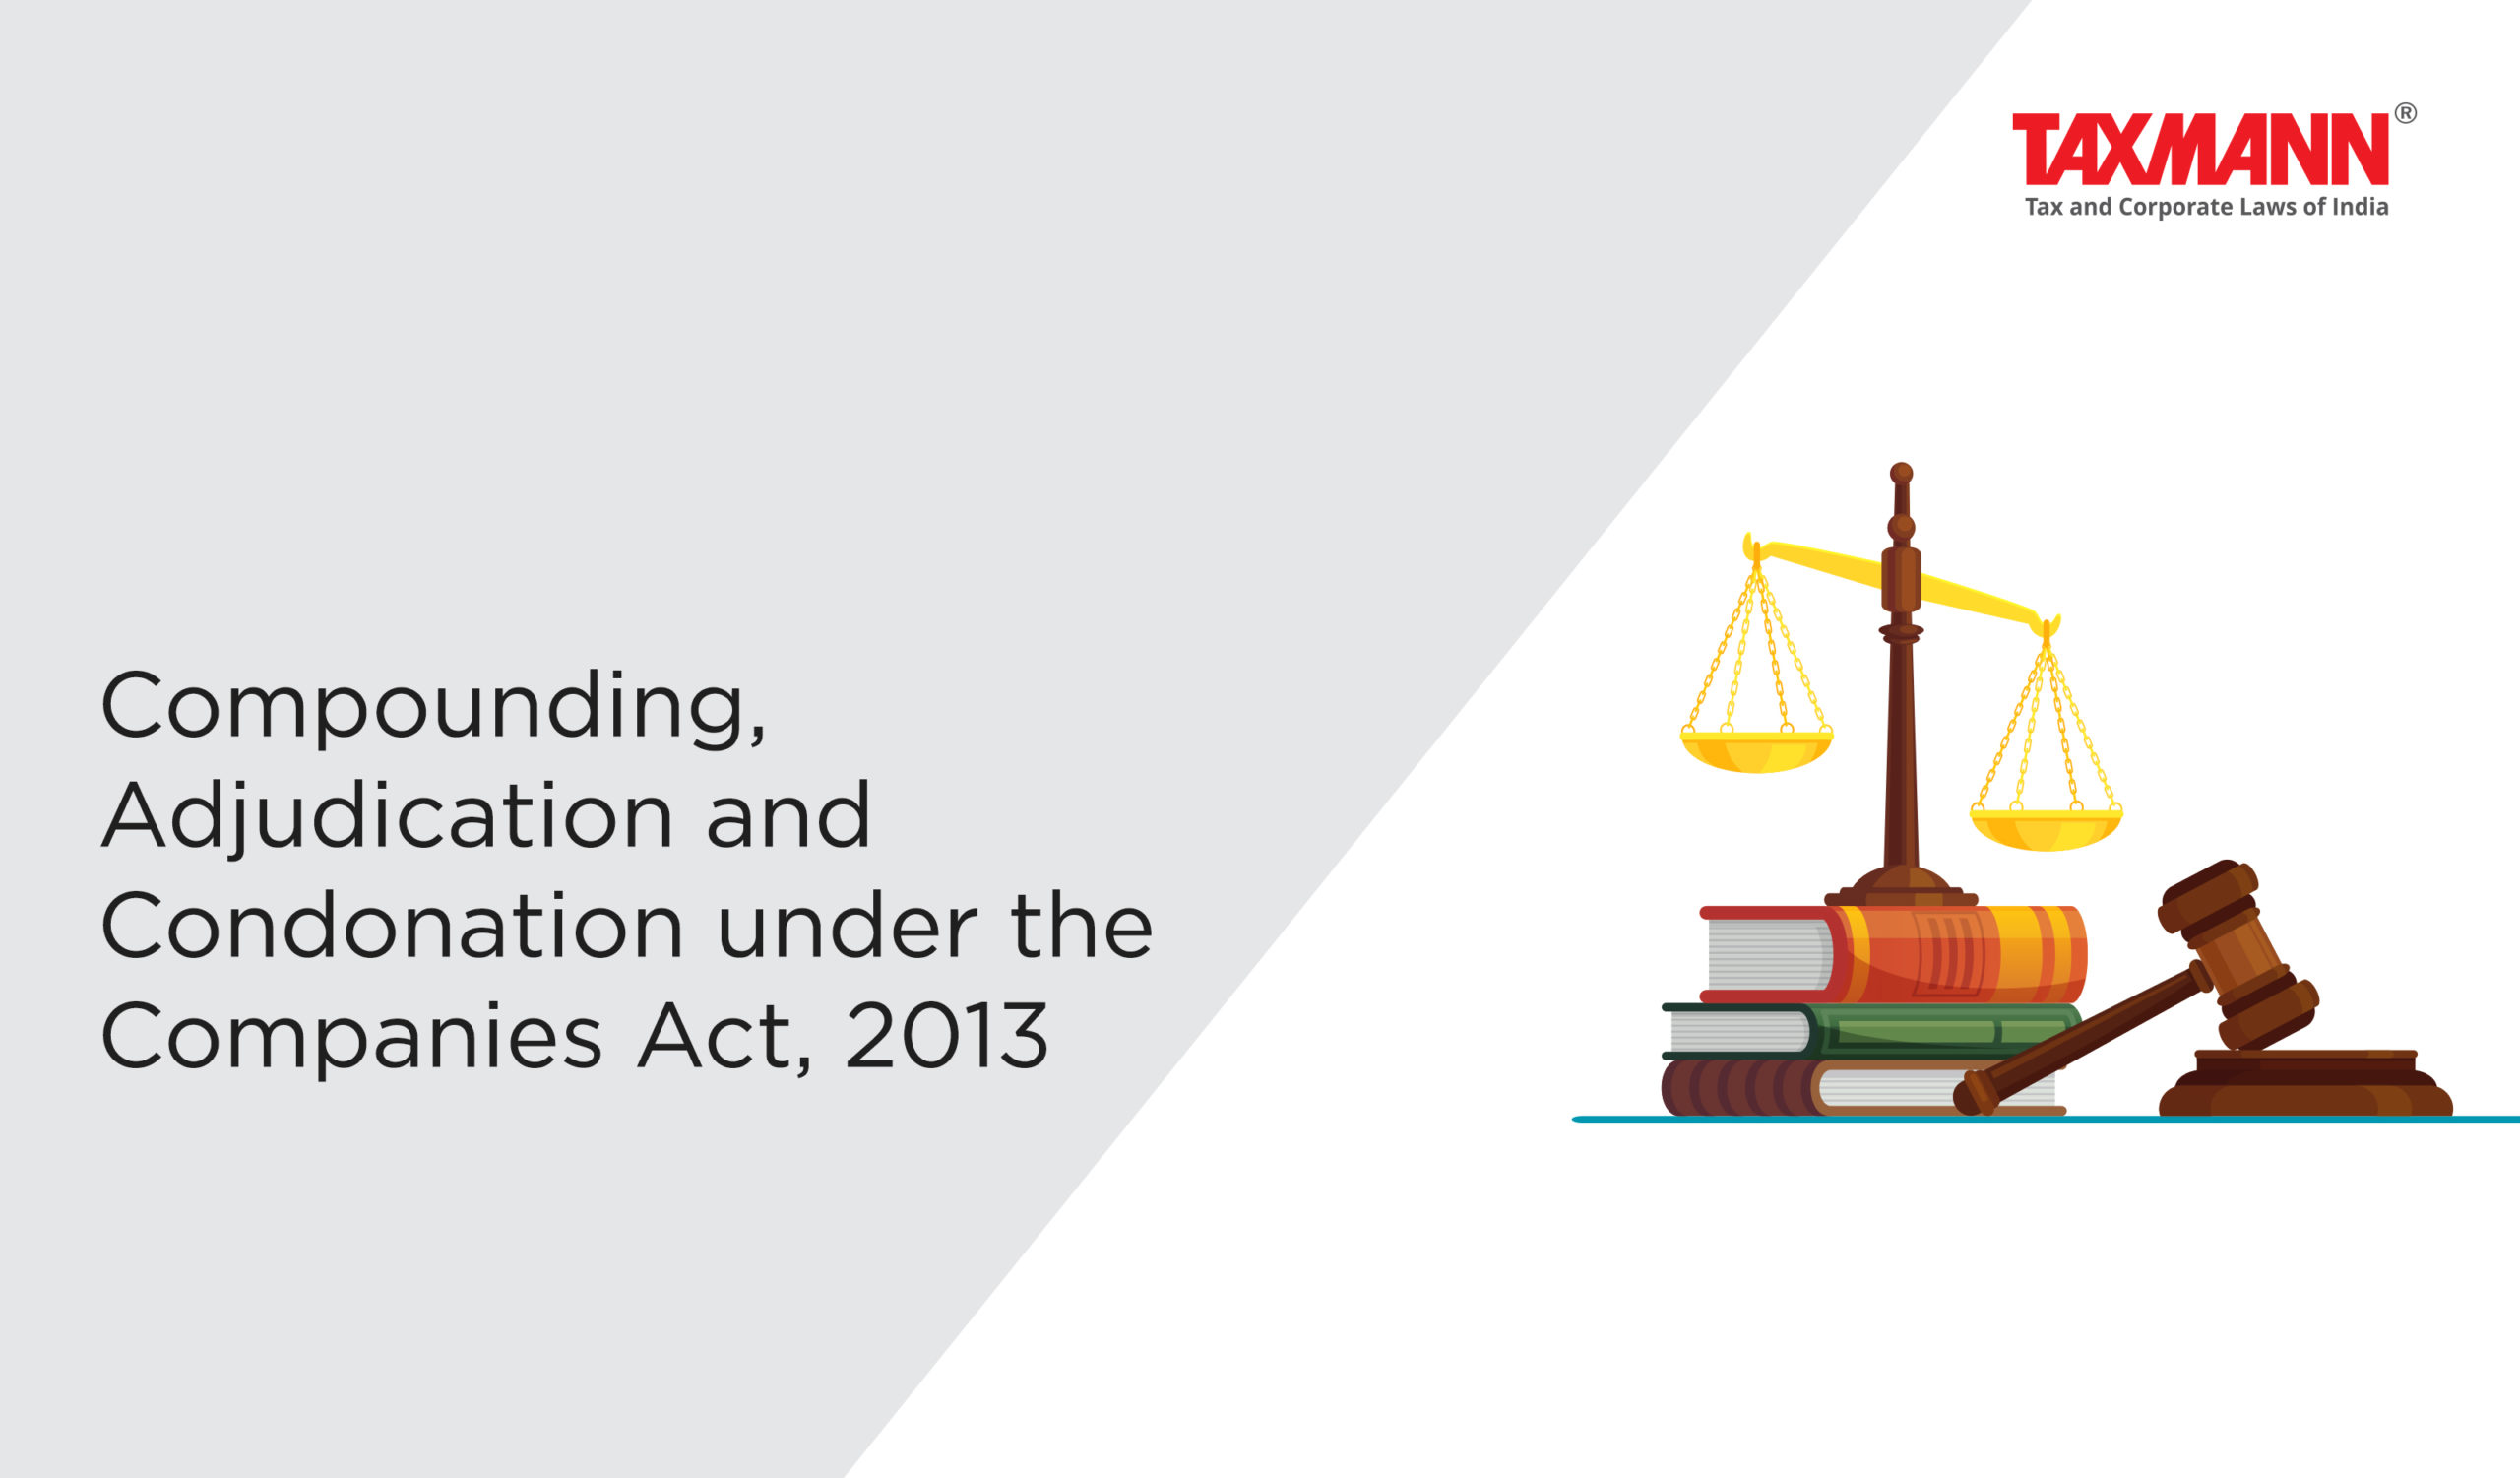 Compounding adjudication and condonation under Companies Act